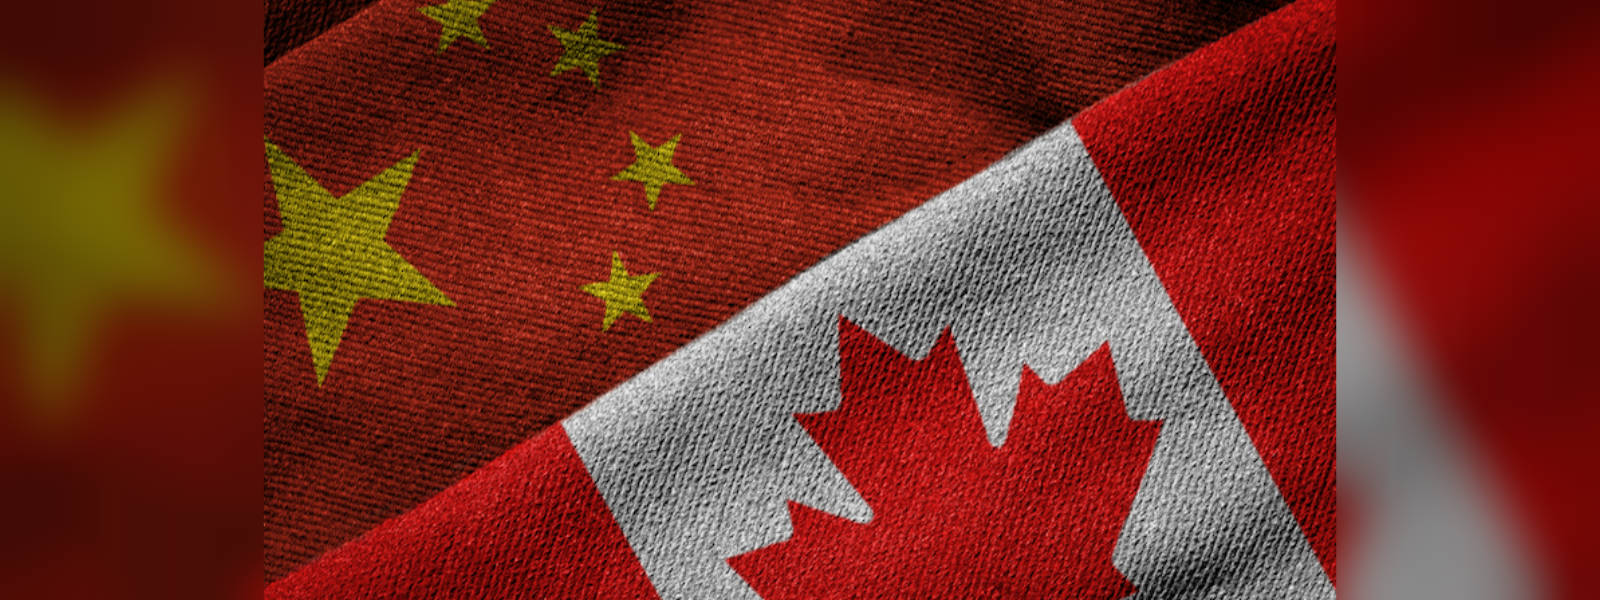 China denounces Canada for ‘naive’ approach over detained citizens